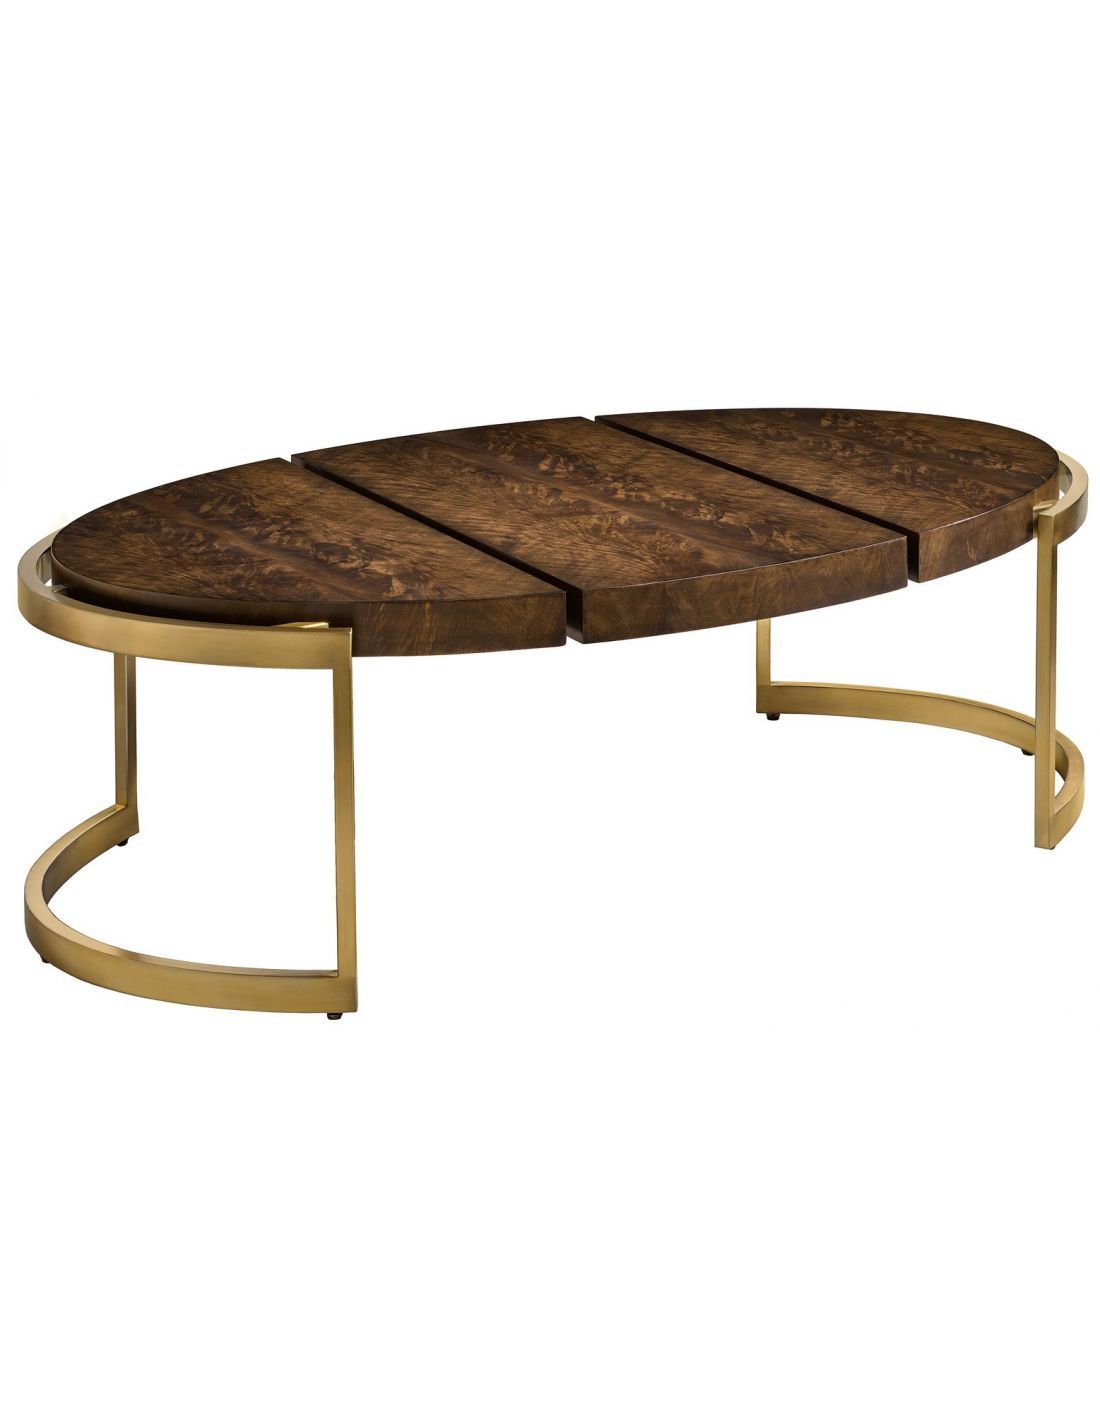 Modern Style Metal Frame Oval Coffee Table Pertaining To Metal Oval Coffee Tables (View 12 of 20)